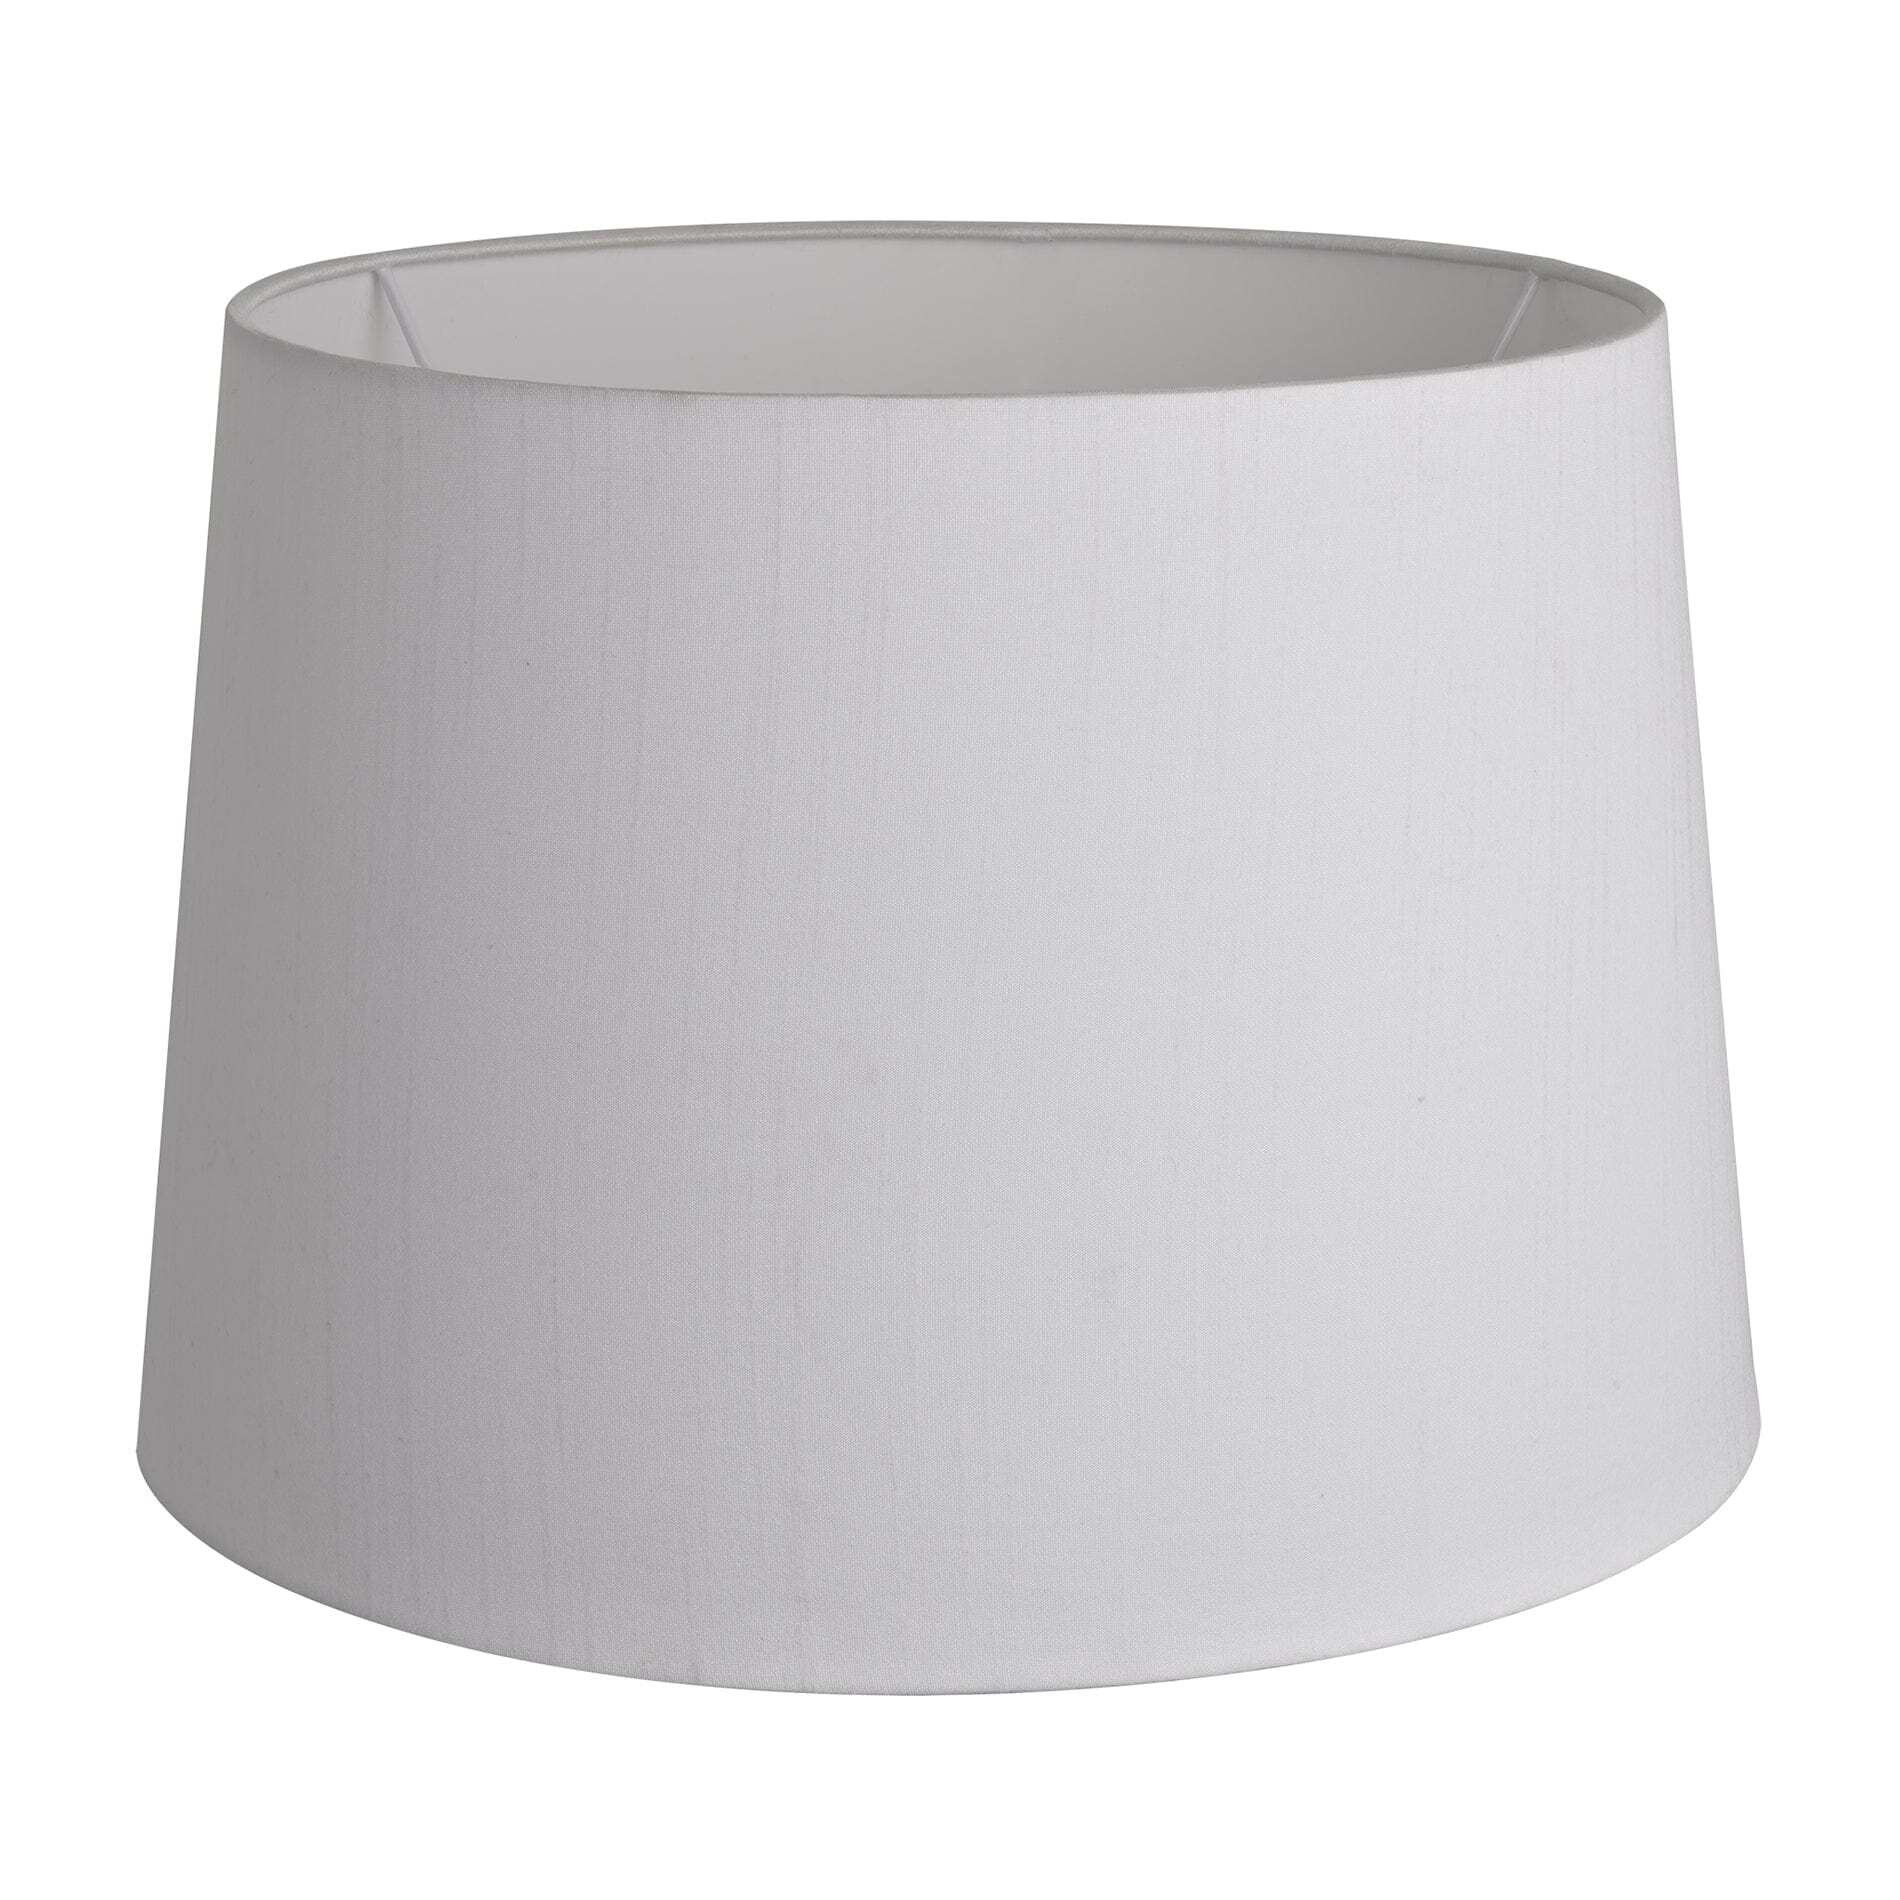 Empire - Large - White Dupion Silk - Lampshade Only